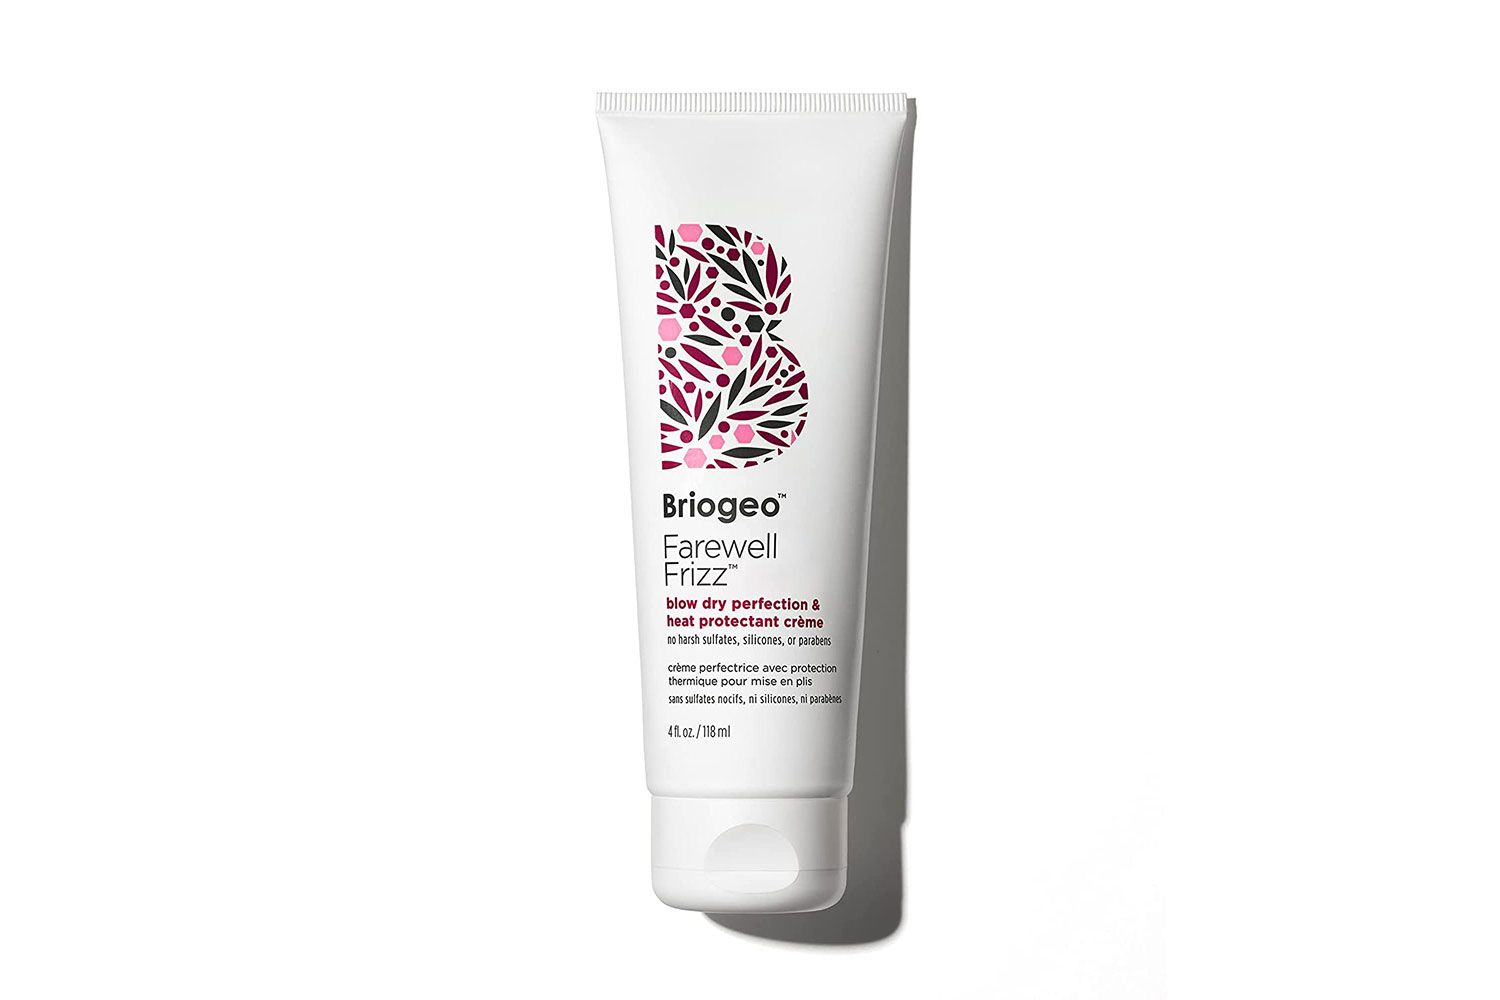 Briogeo Farewell Frizz Blow Dry Perfection &amp; Heat Protectant Cr&egrave;me